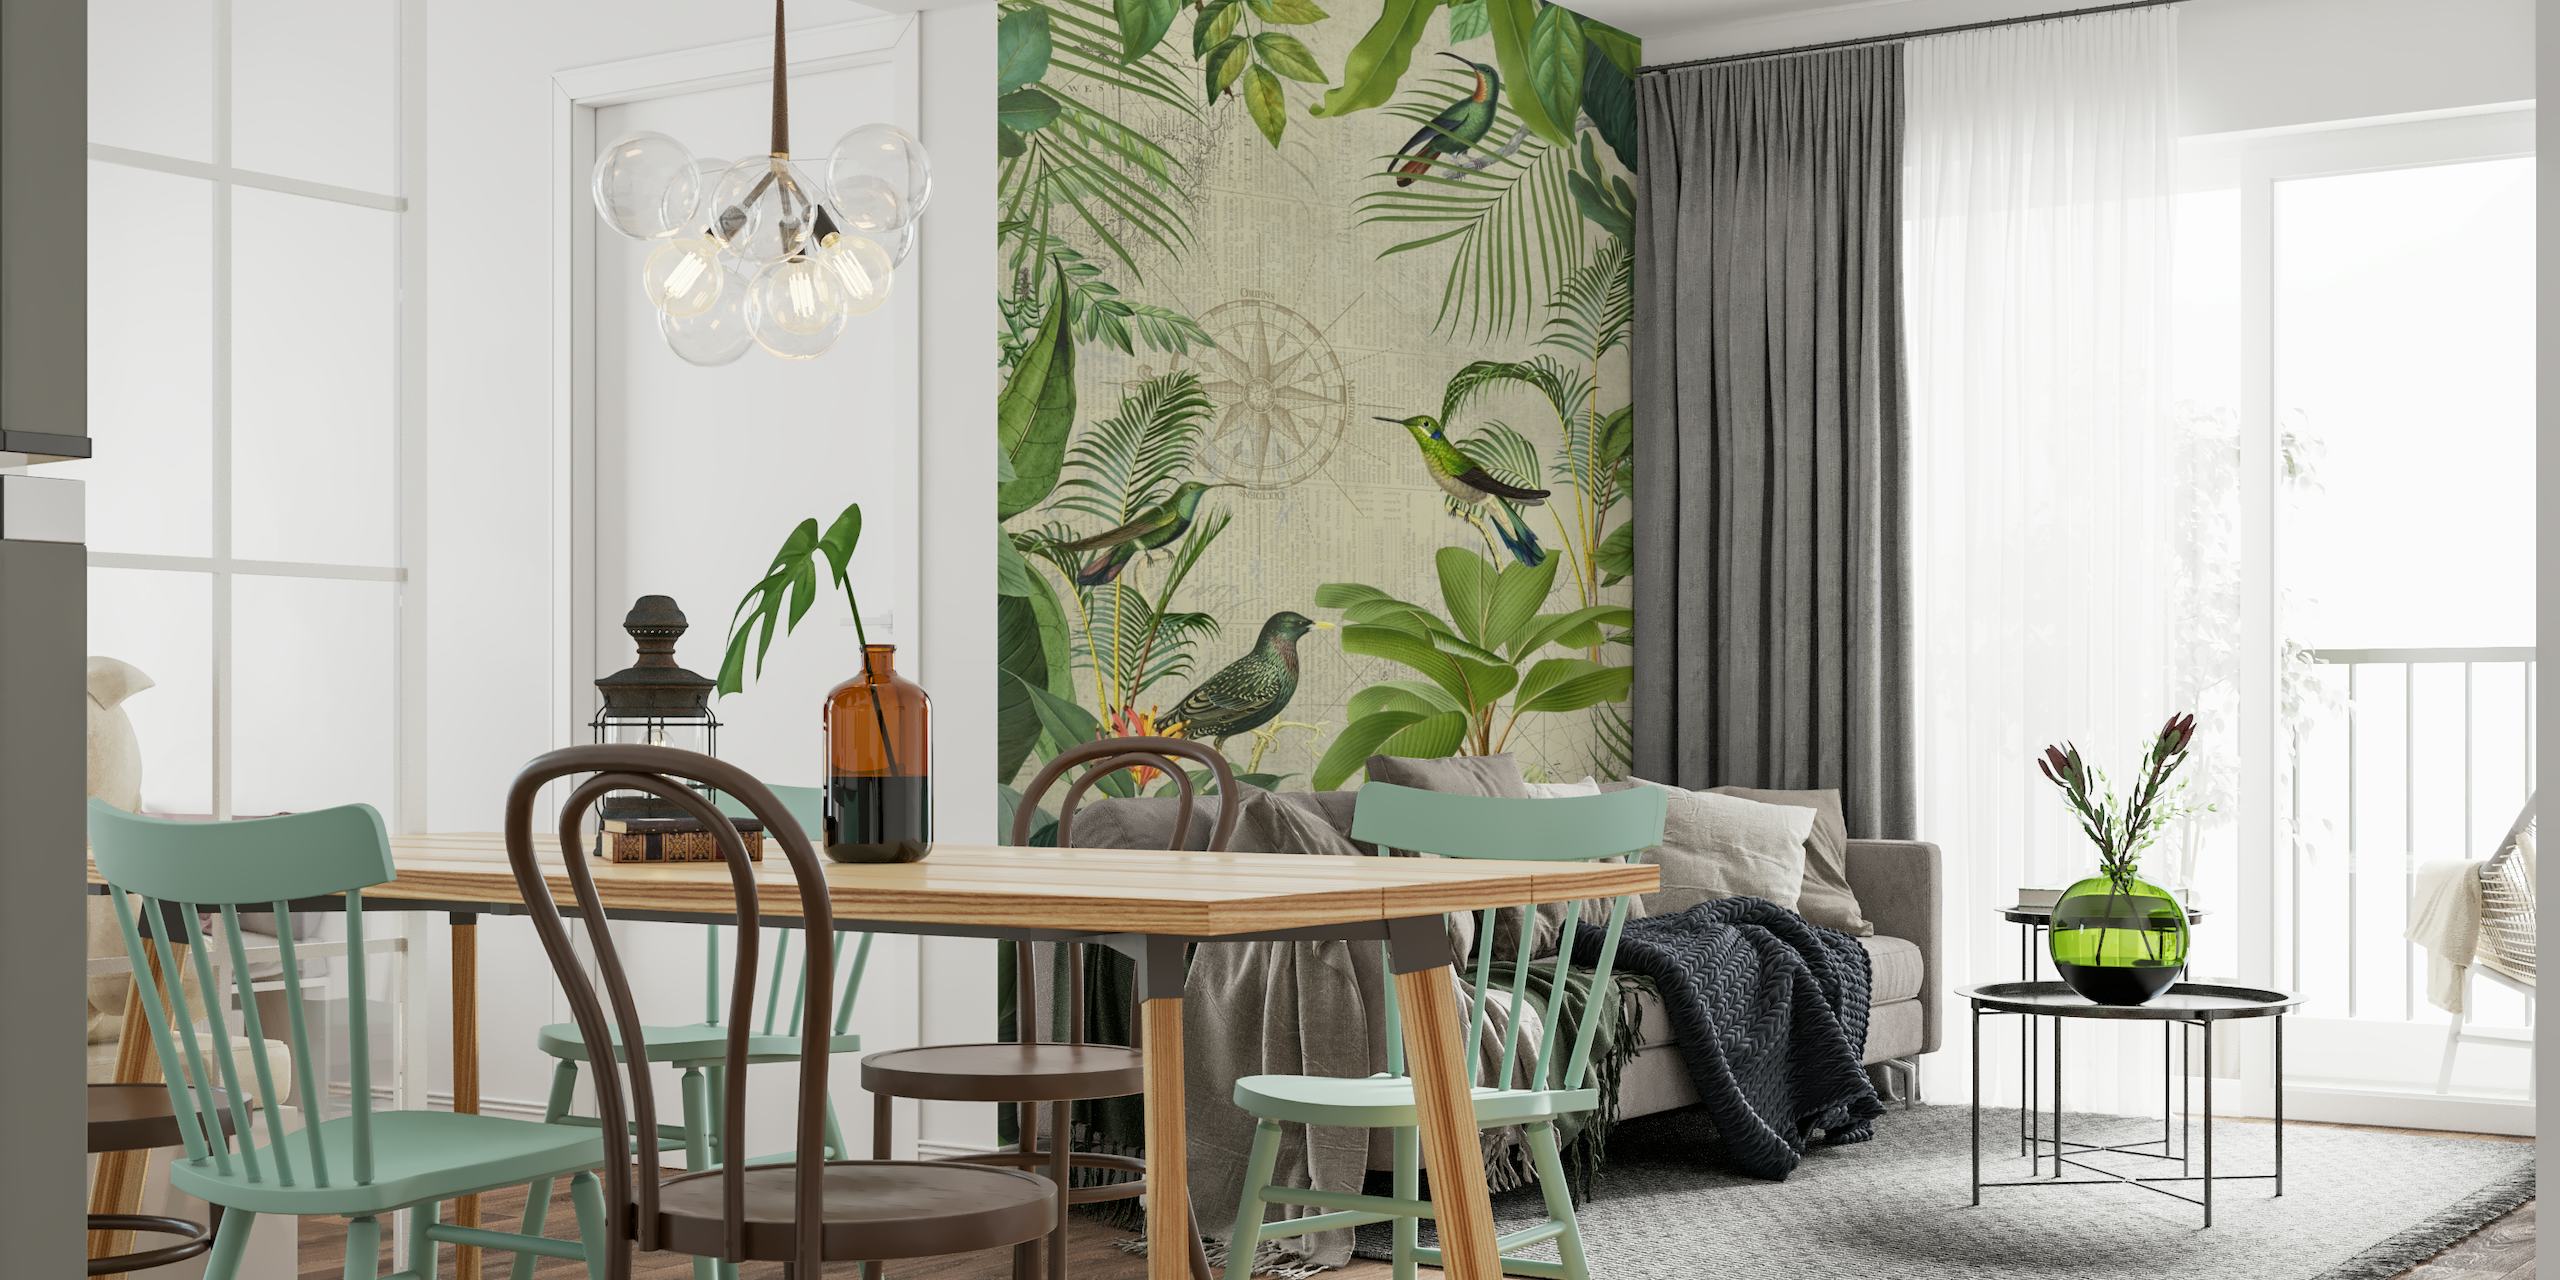 Tropical hummingbird wall mural with lush greenery and compass rose design